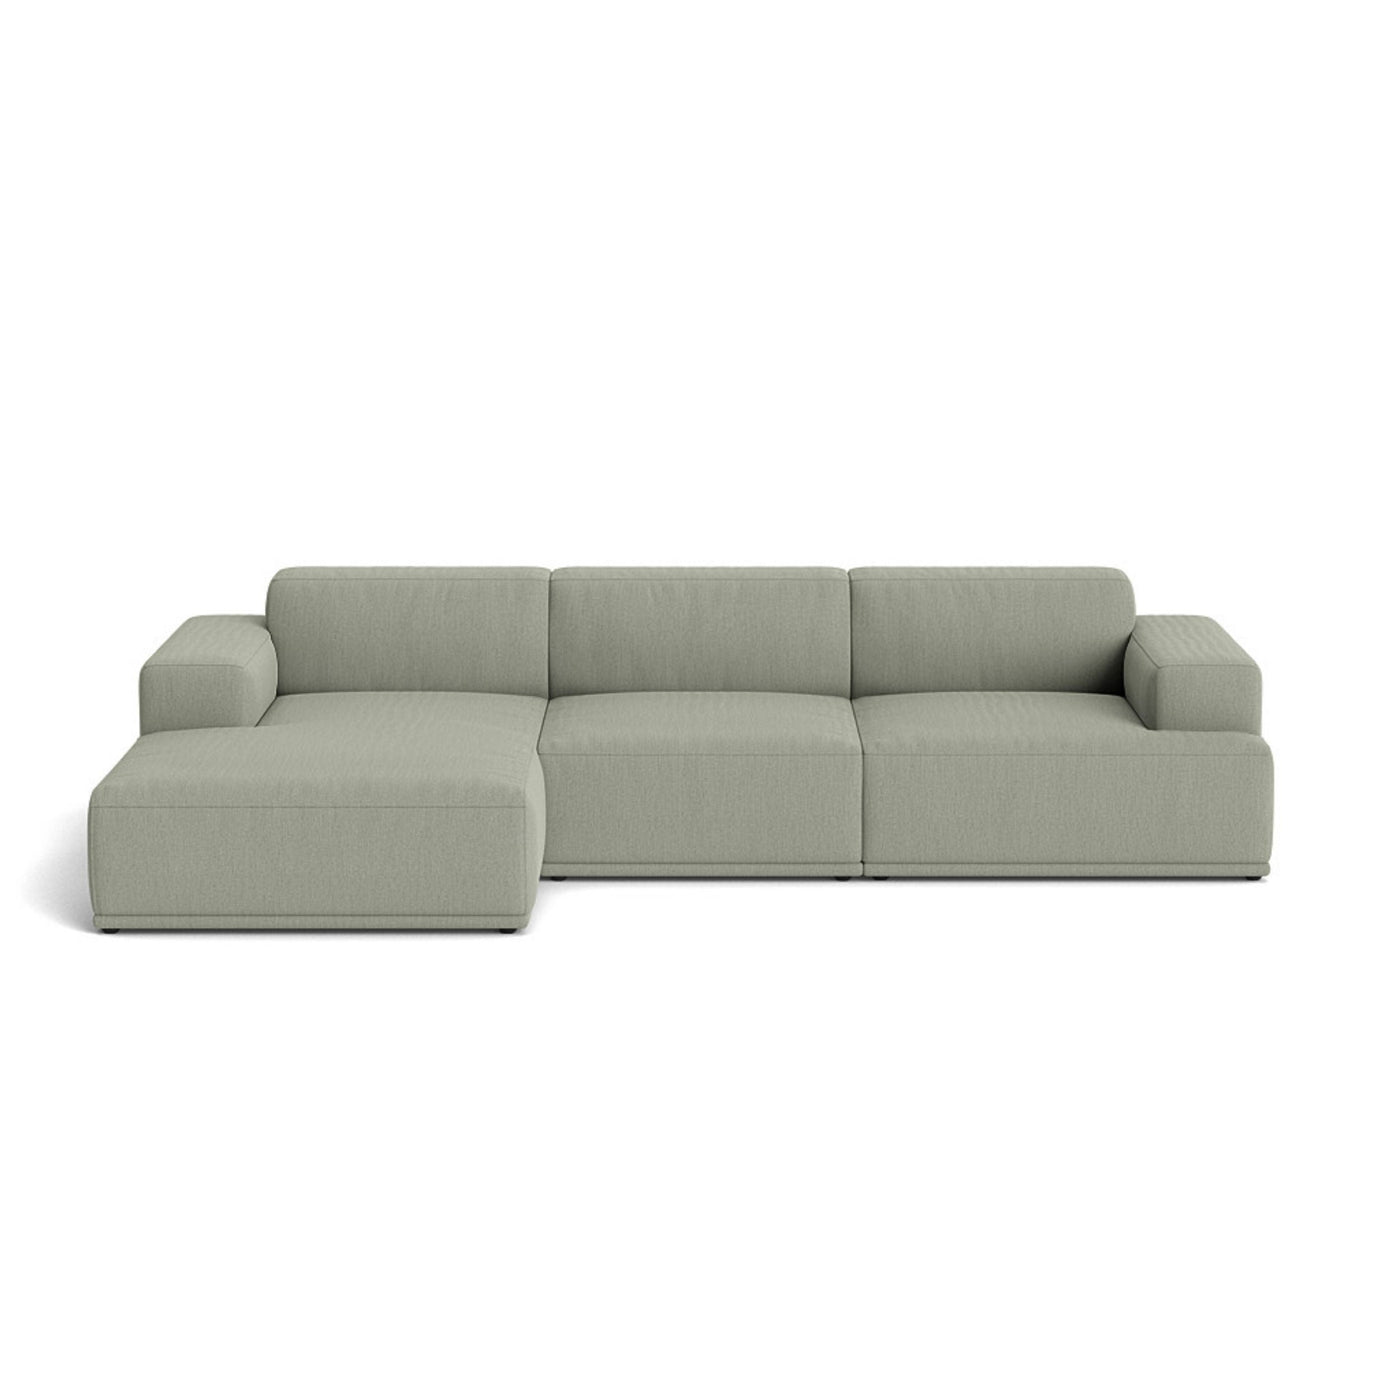 Muuto Connect Soft Modular 3 Seater Sofa, configuration 2. Made-to-order from someday designs. #colour_re-wool-408